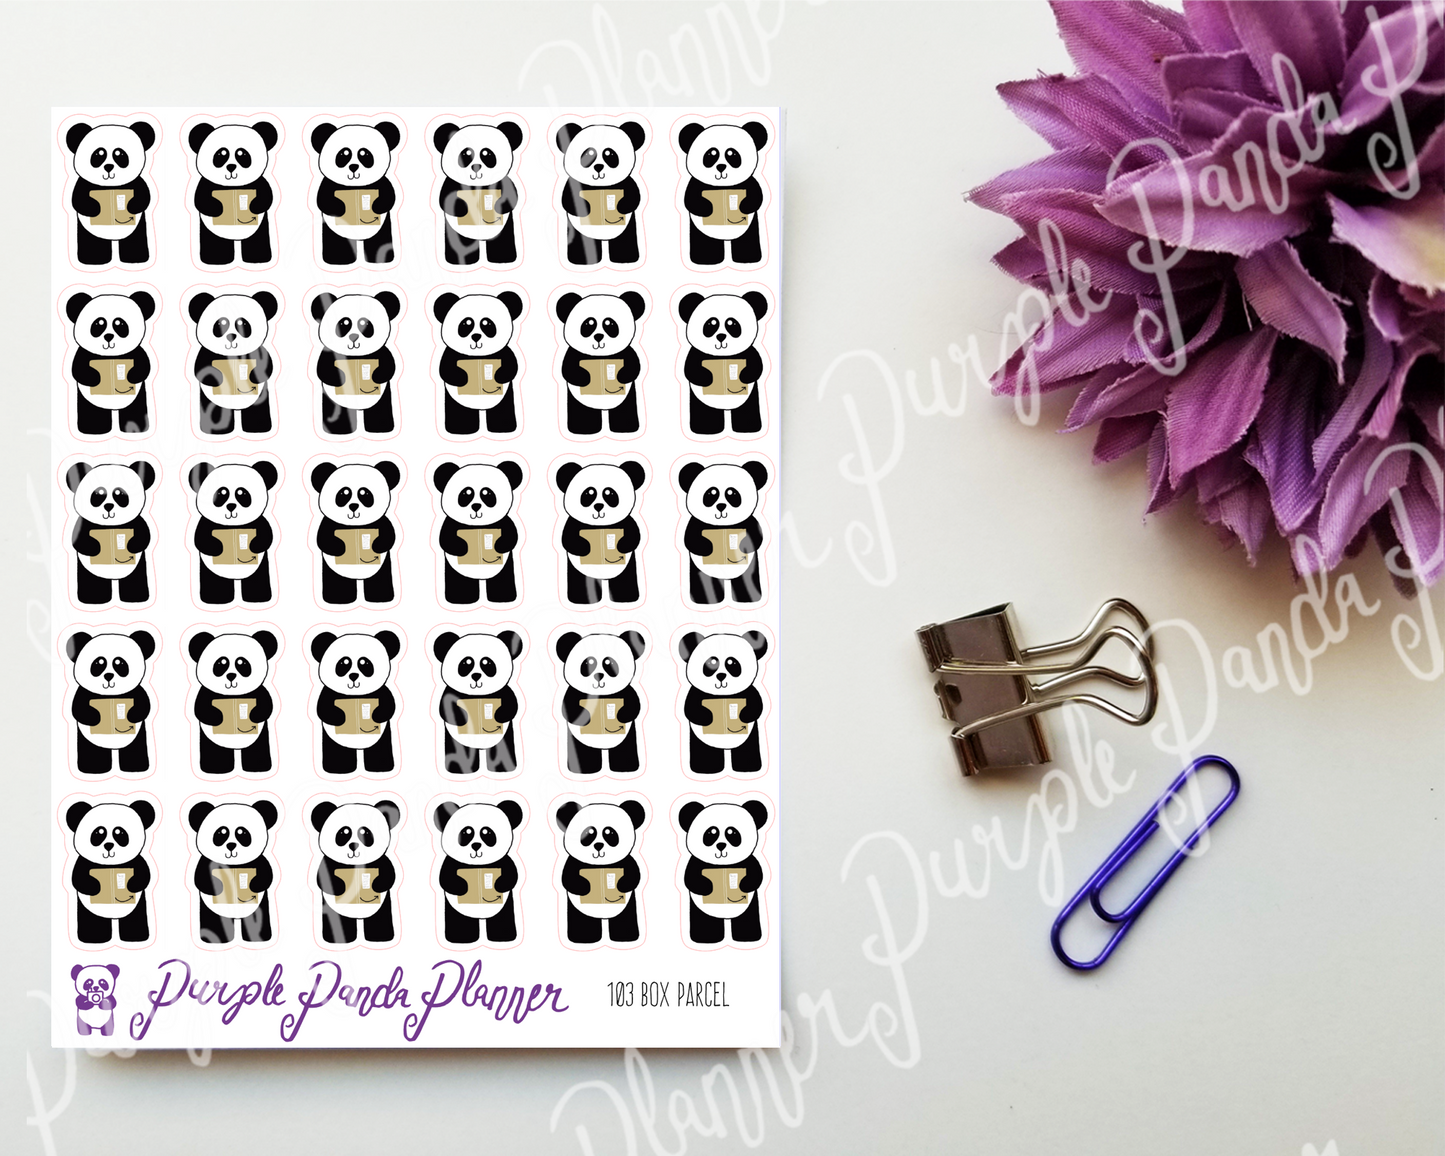 Panda with Box Parcel 103 Planner or Bullet Journal Sticker for Functional Planning